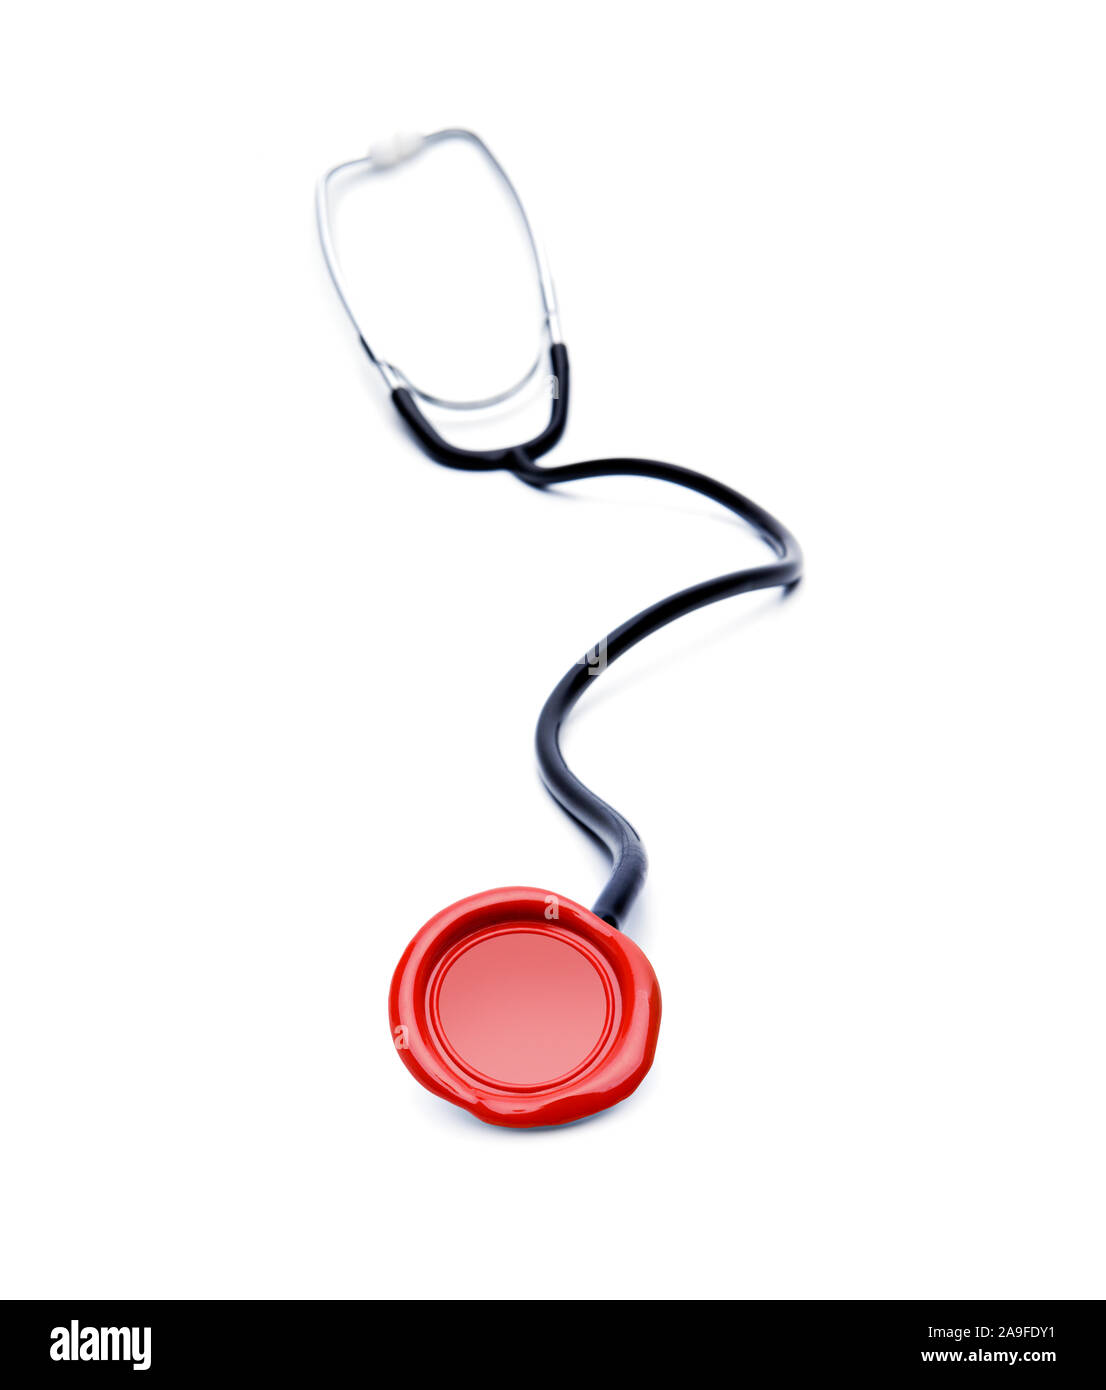 Stethoscope with seal of quality Stock Photo